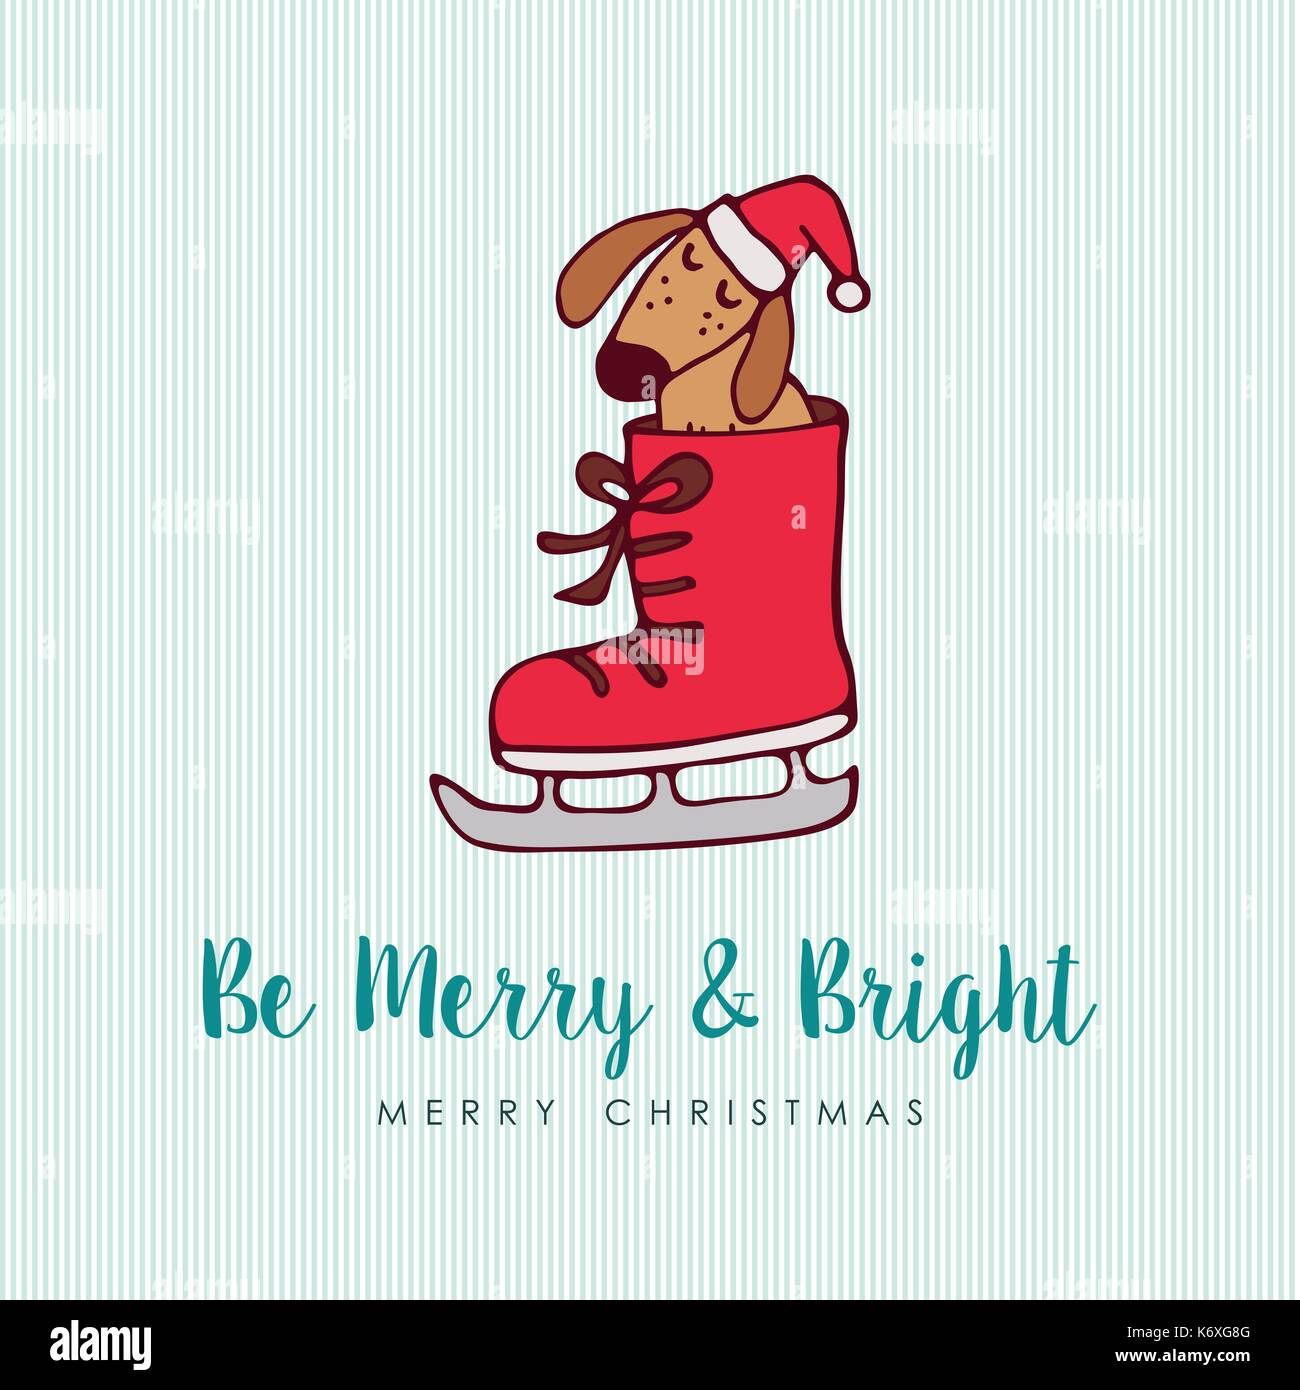 Merry Christmas hand drawn dog greeting card illustration. Funny puppy inside ice skate boot with santa hat and handwritten holiday typography quote.  Stock Vector